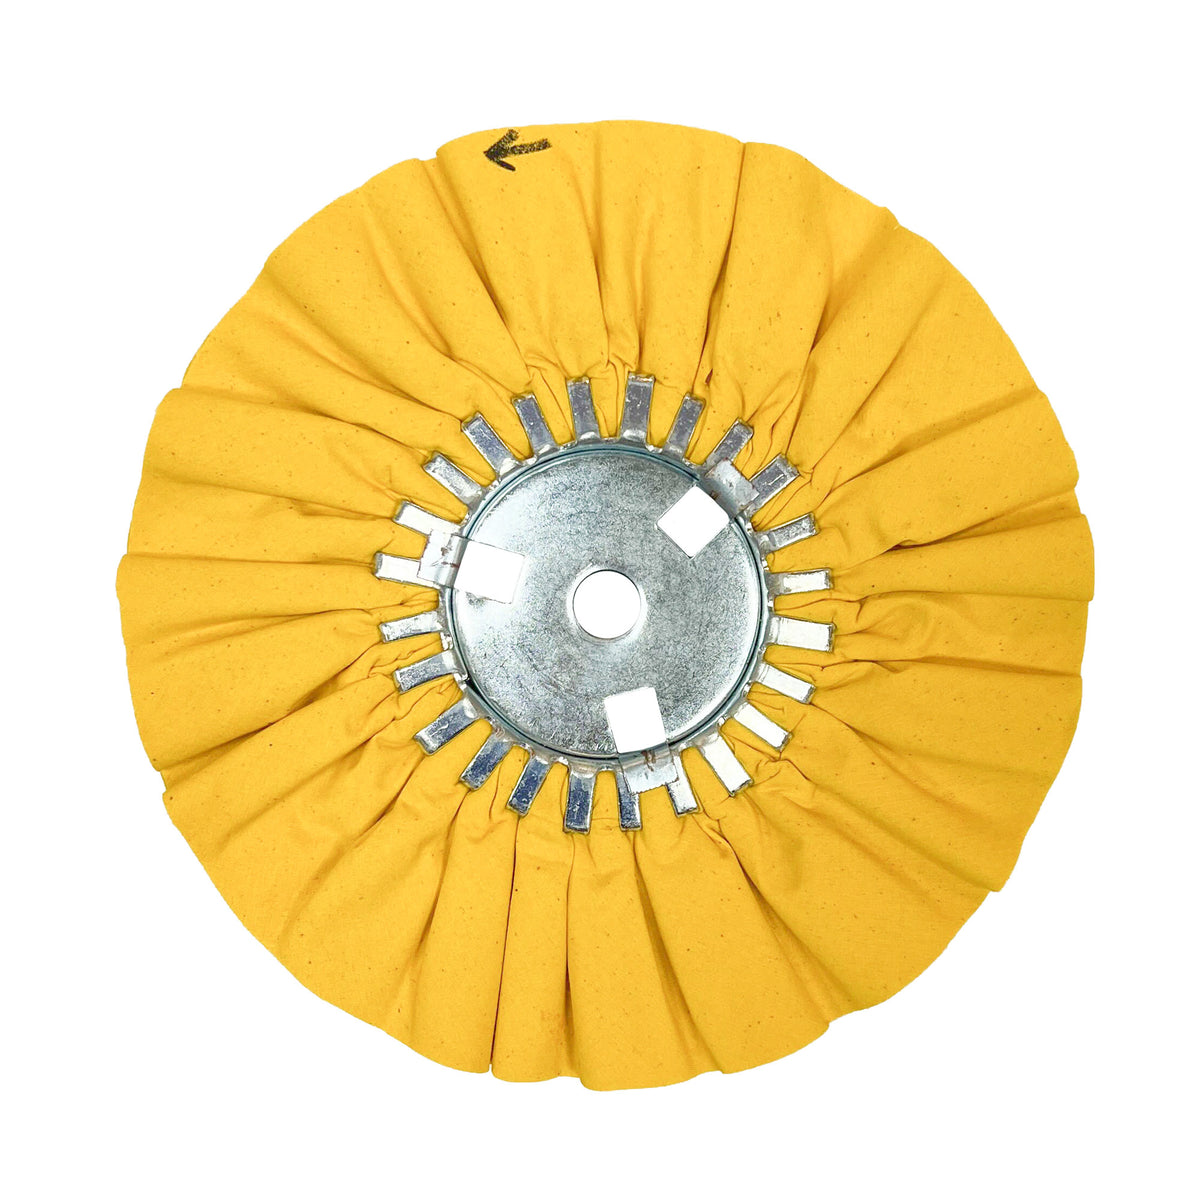 Renegade Products USA Yellow Airway Buffing Wheel with Center Plate - Professional Buffing Tool for Precise Polishing and Finishing